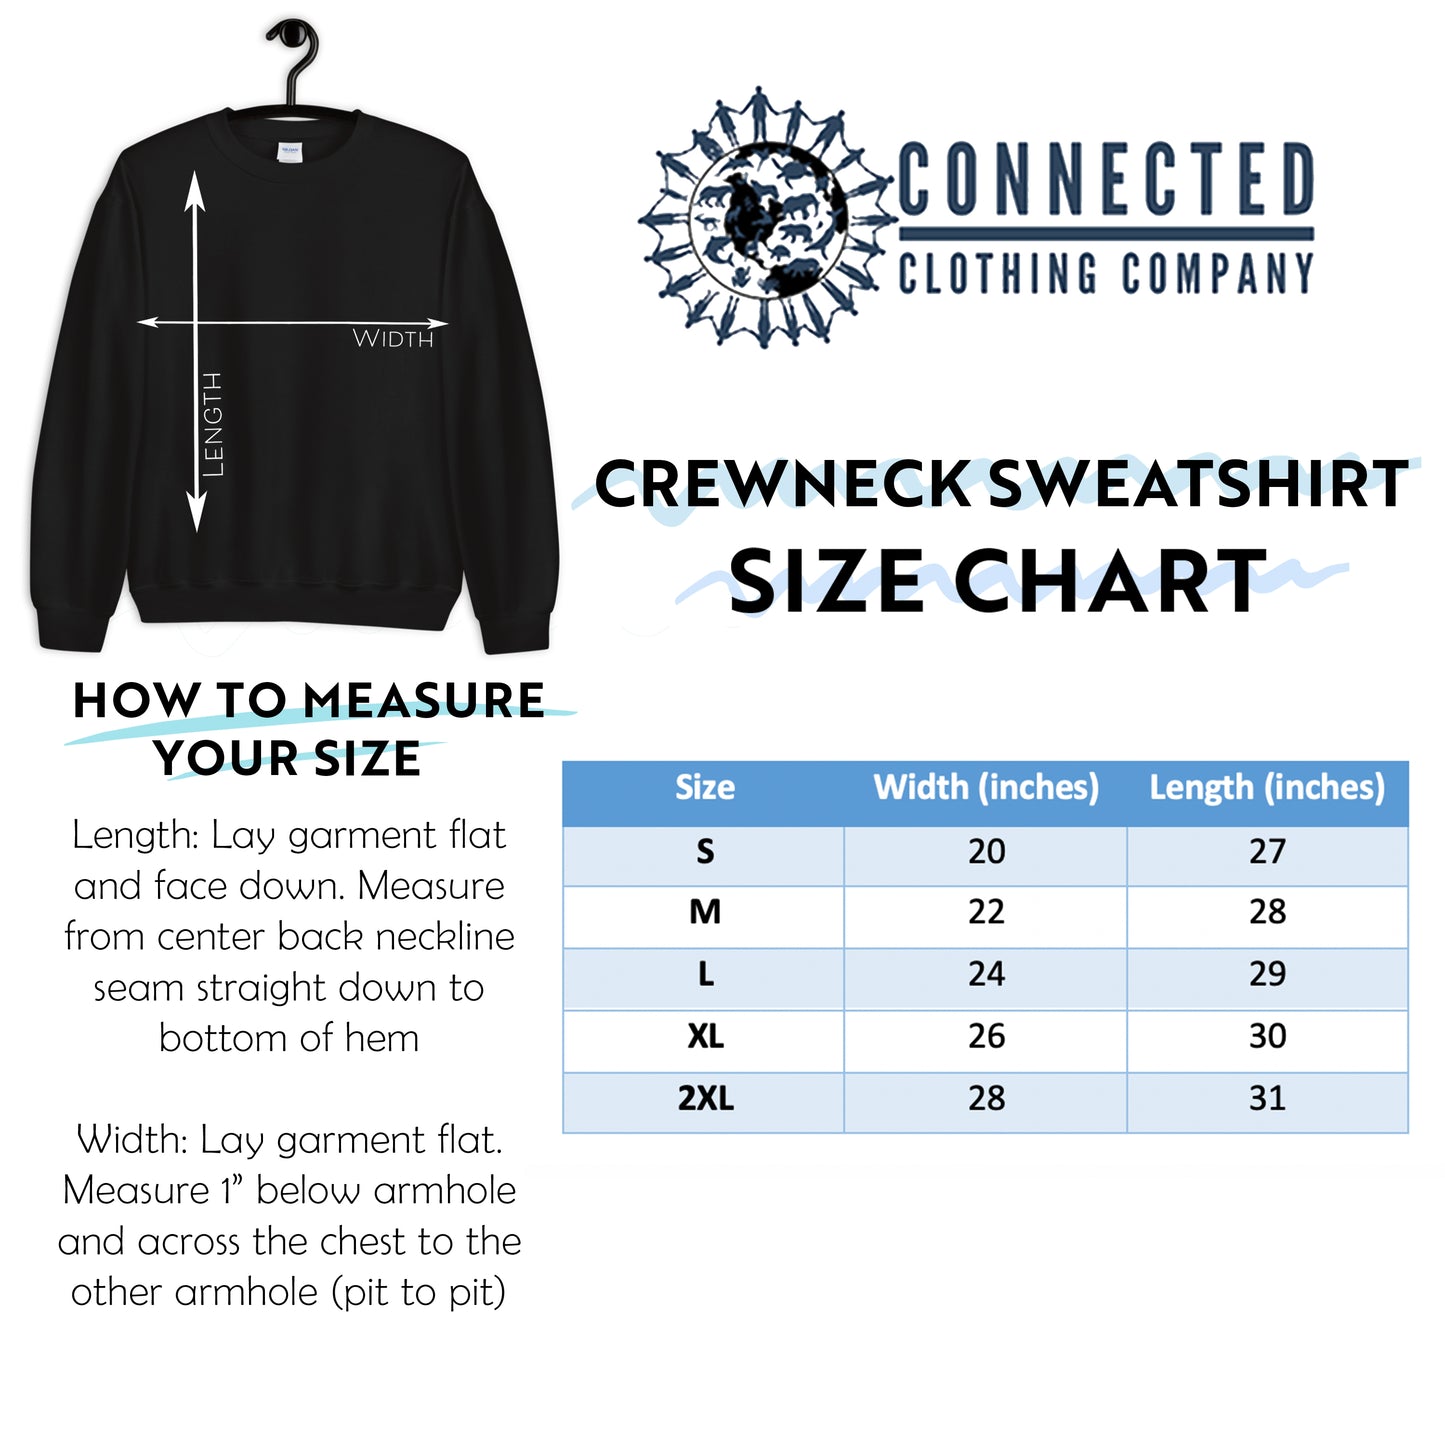 Save The Sharls Crewneck Sweatshirt - Connected Clothing Company - 10% of the proceeds are donated to shark conservation